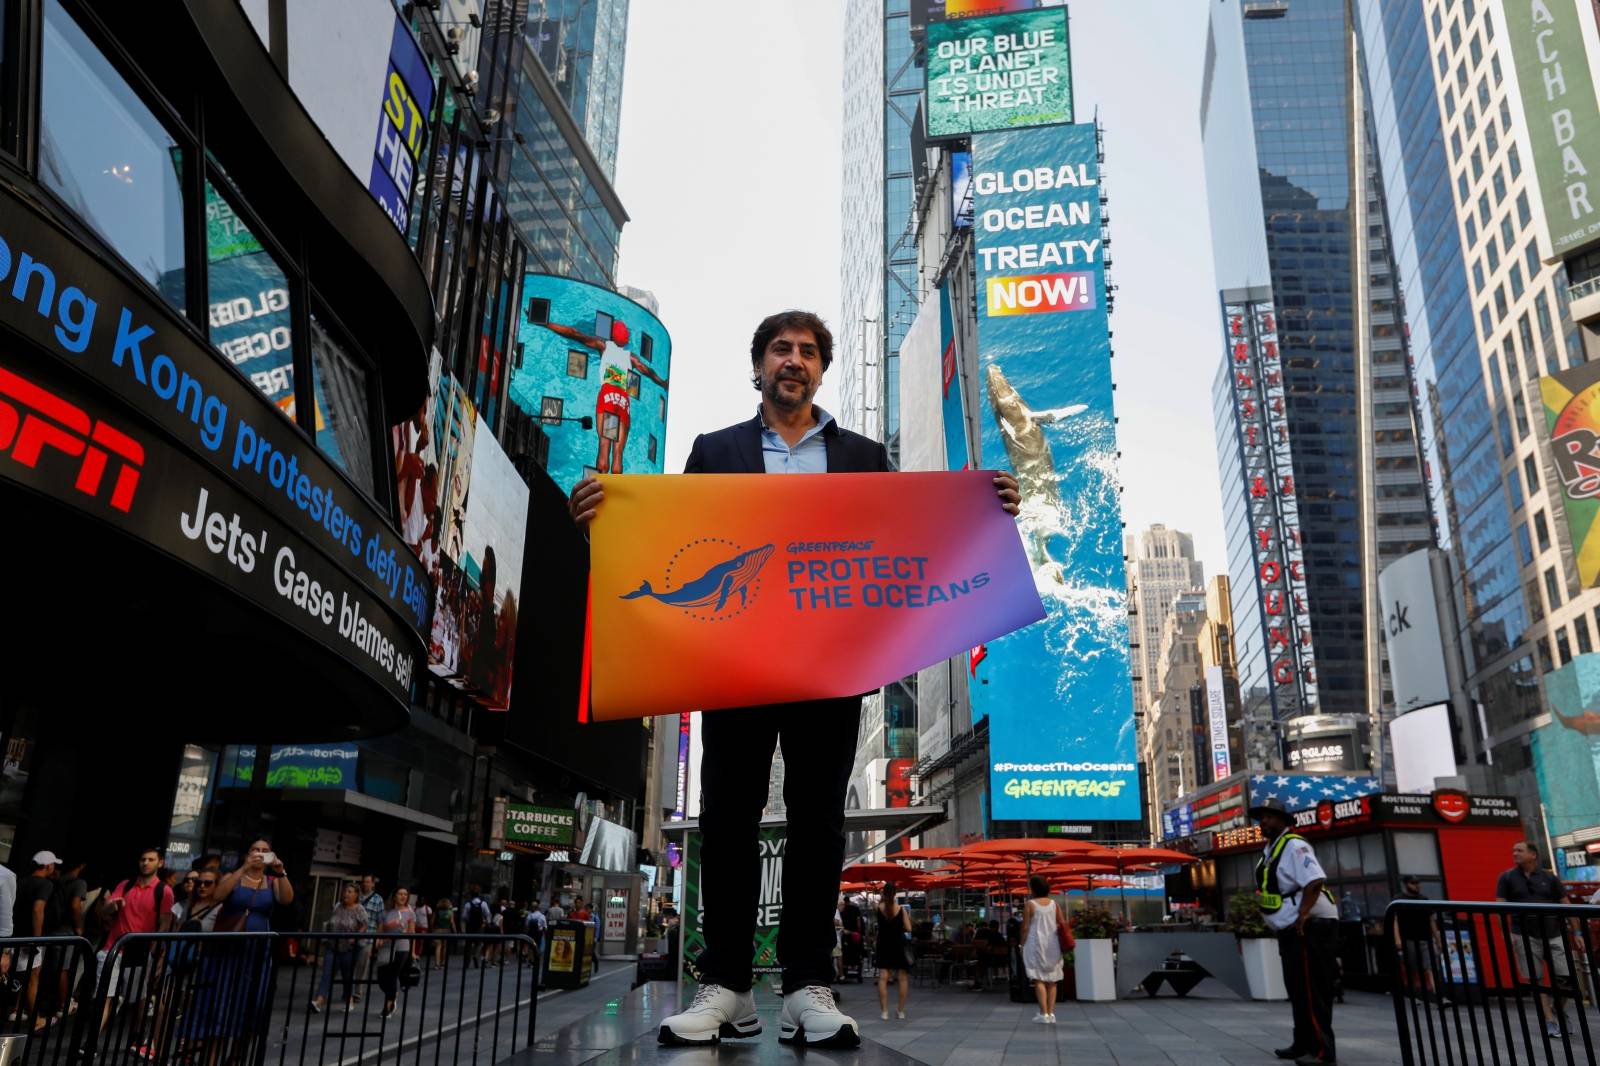 Actor Javier Bardem poses in Times Square ahead of speaking at a United Nations conference on ocean conservation in New York